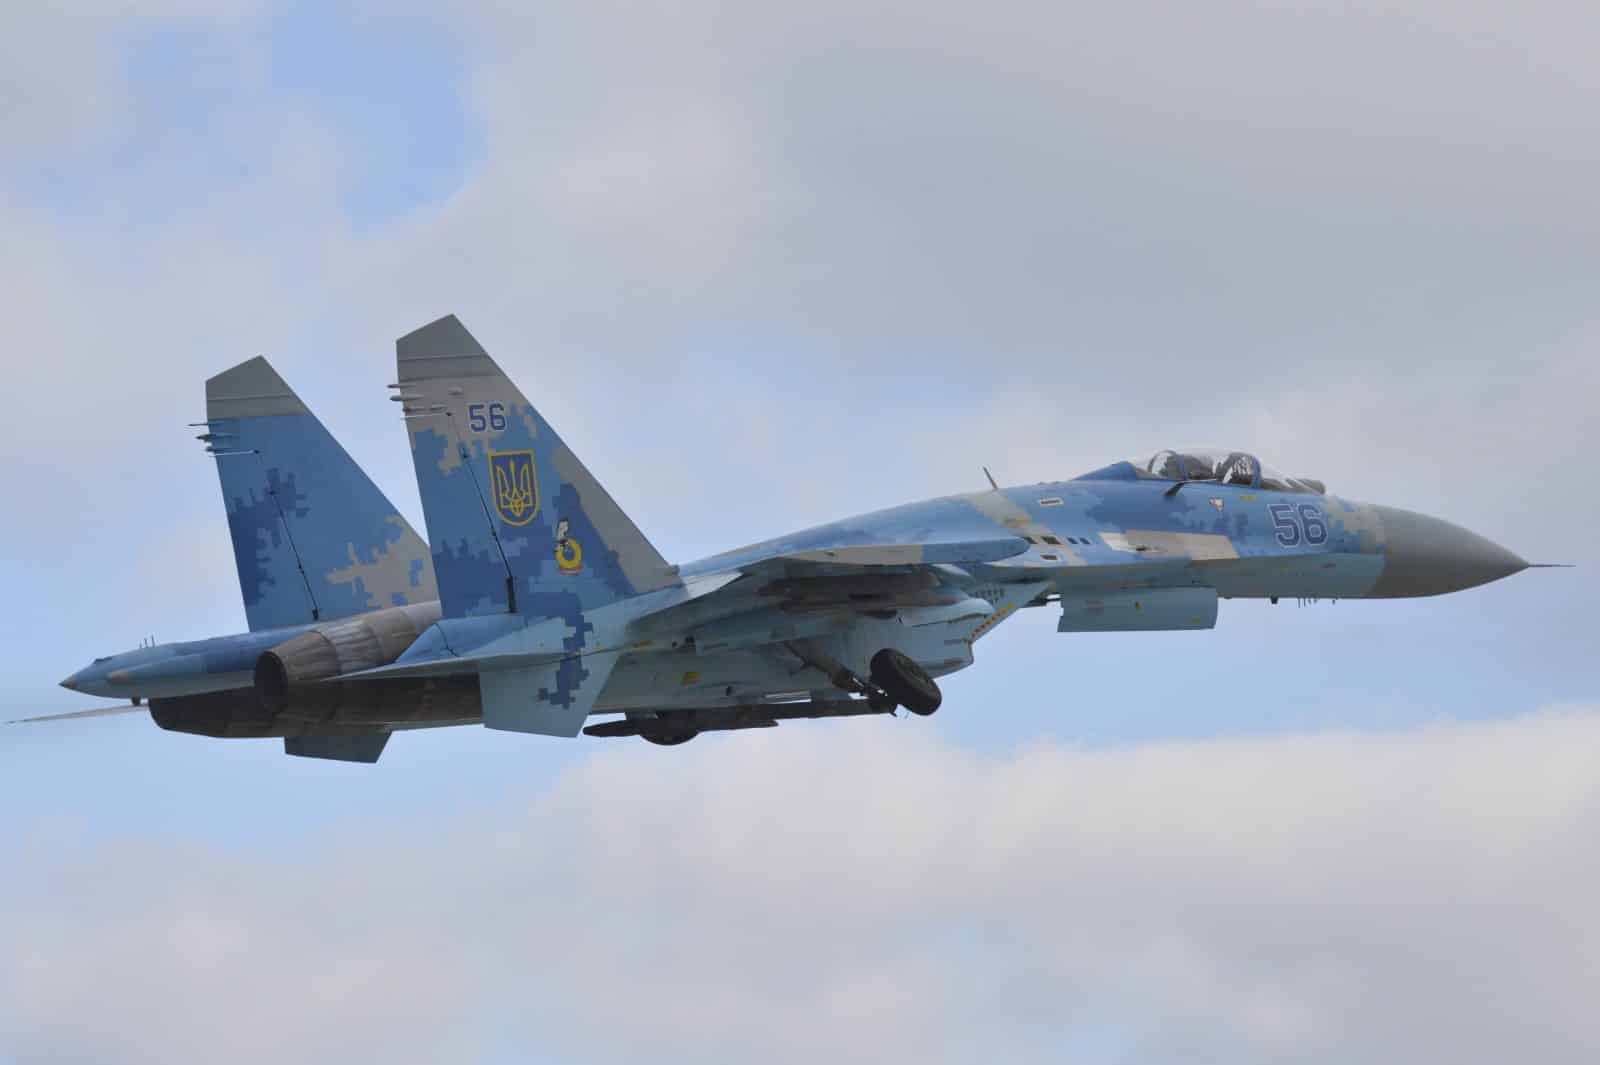 Ukraine controls the majority of its airspace